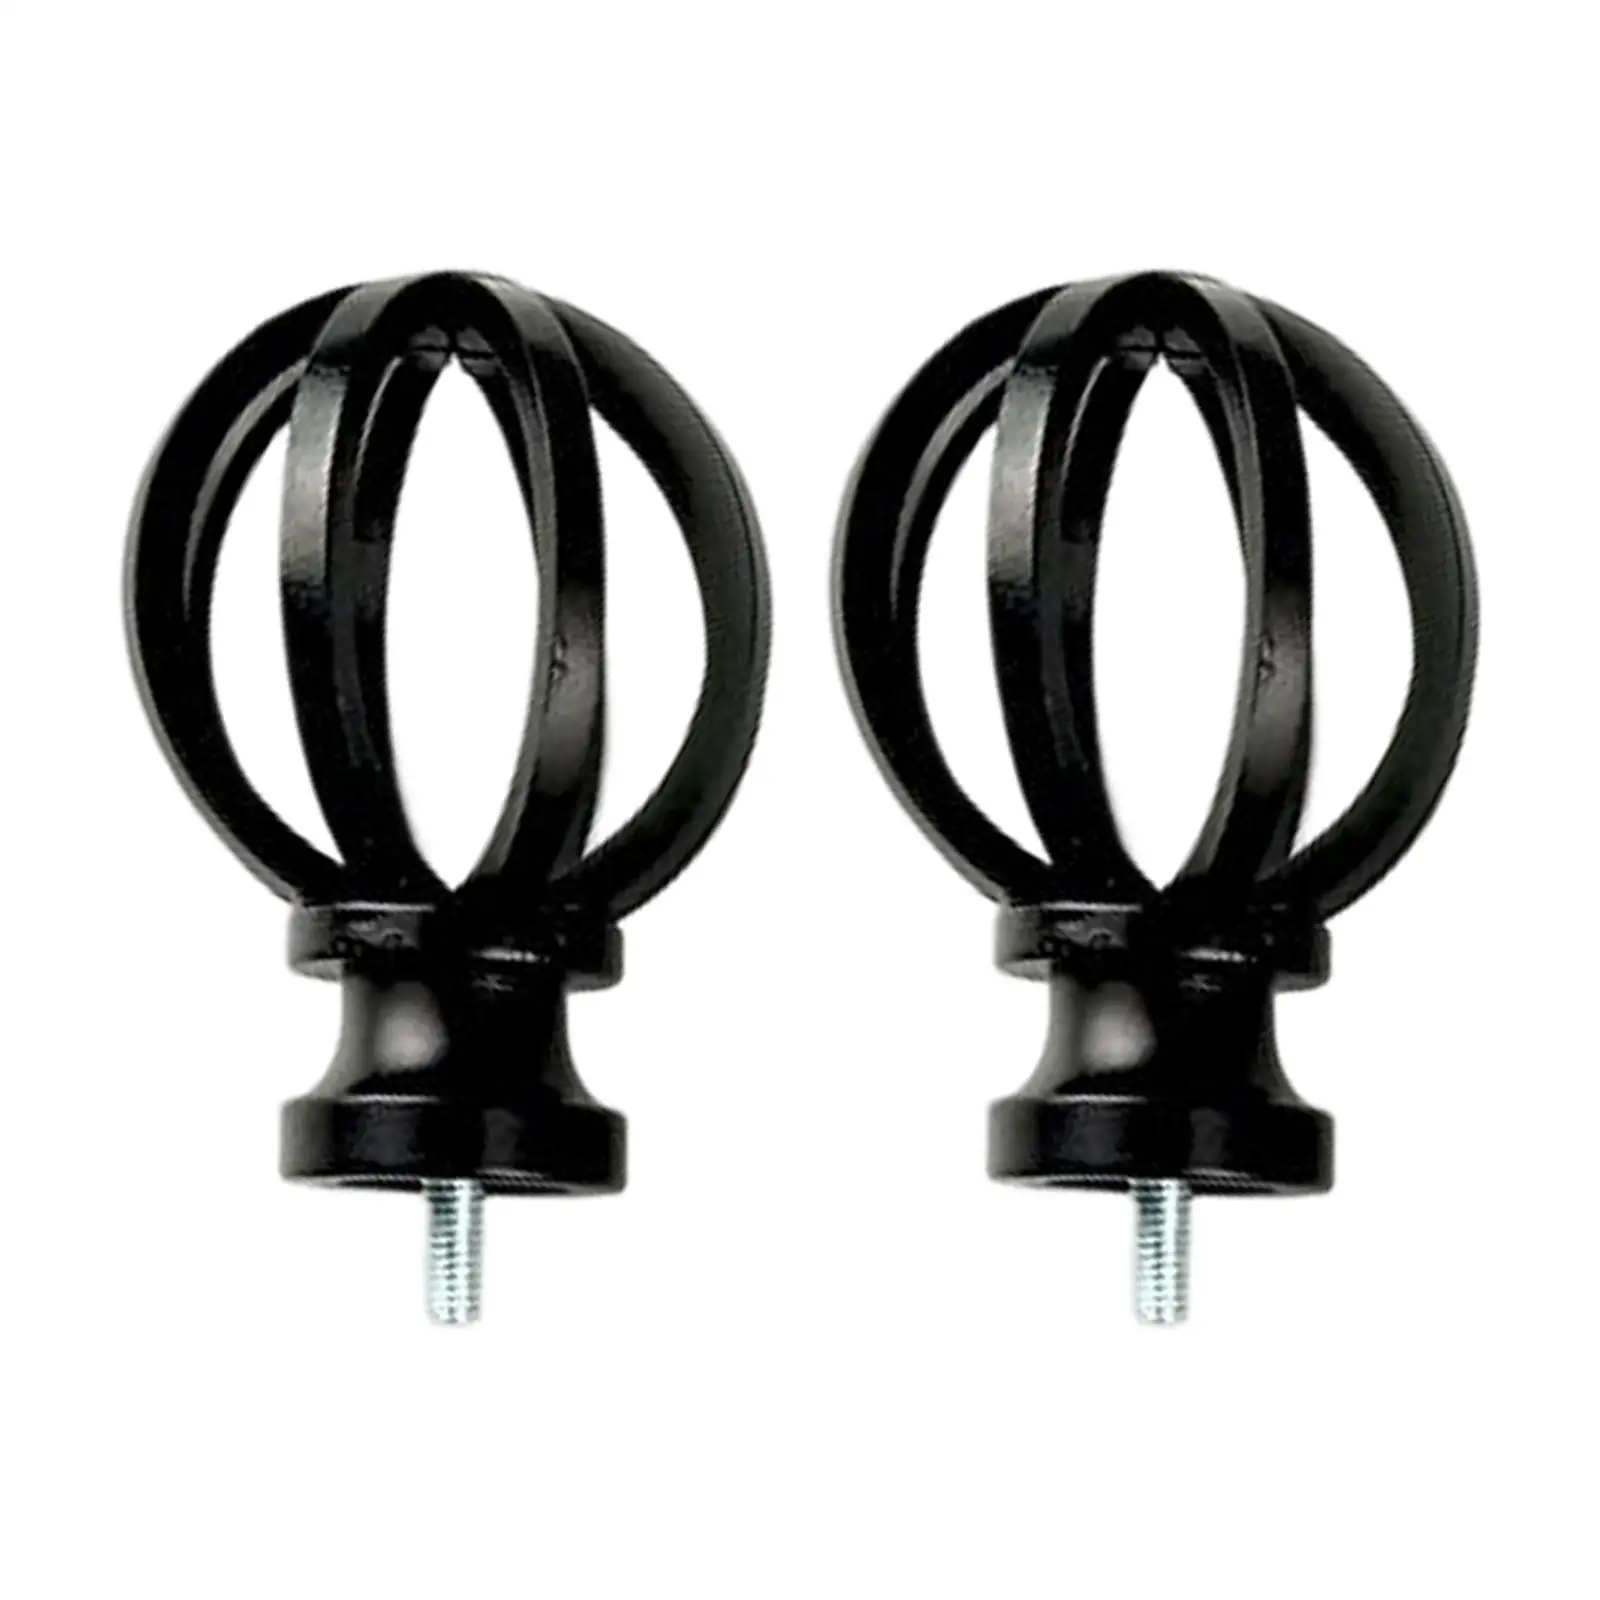 2Pcs Window Curtain Rod Finial Ends 5/8 Inch Diameter Decorative for Bedroom